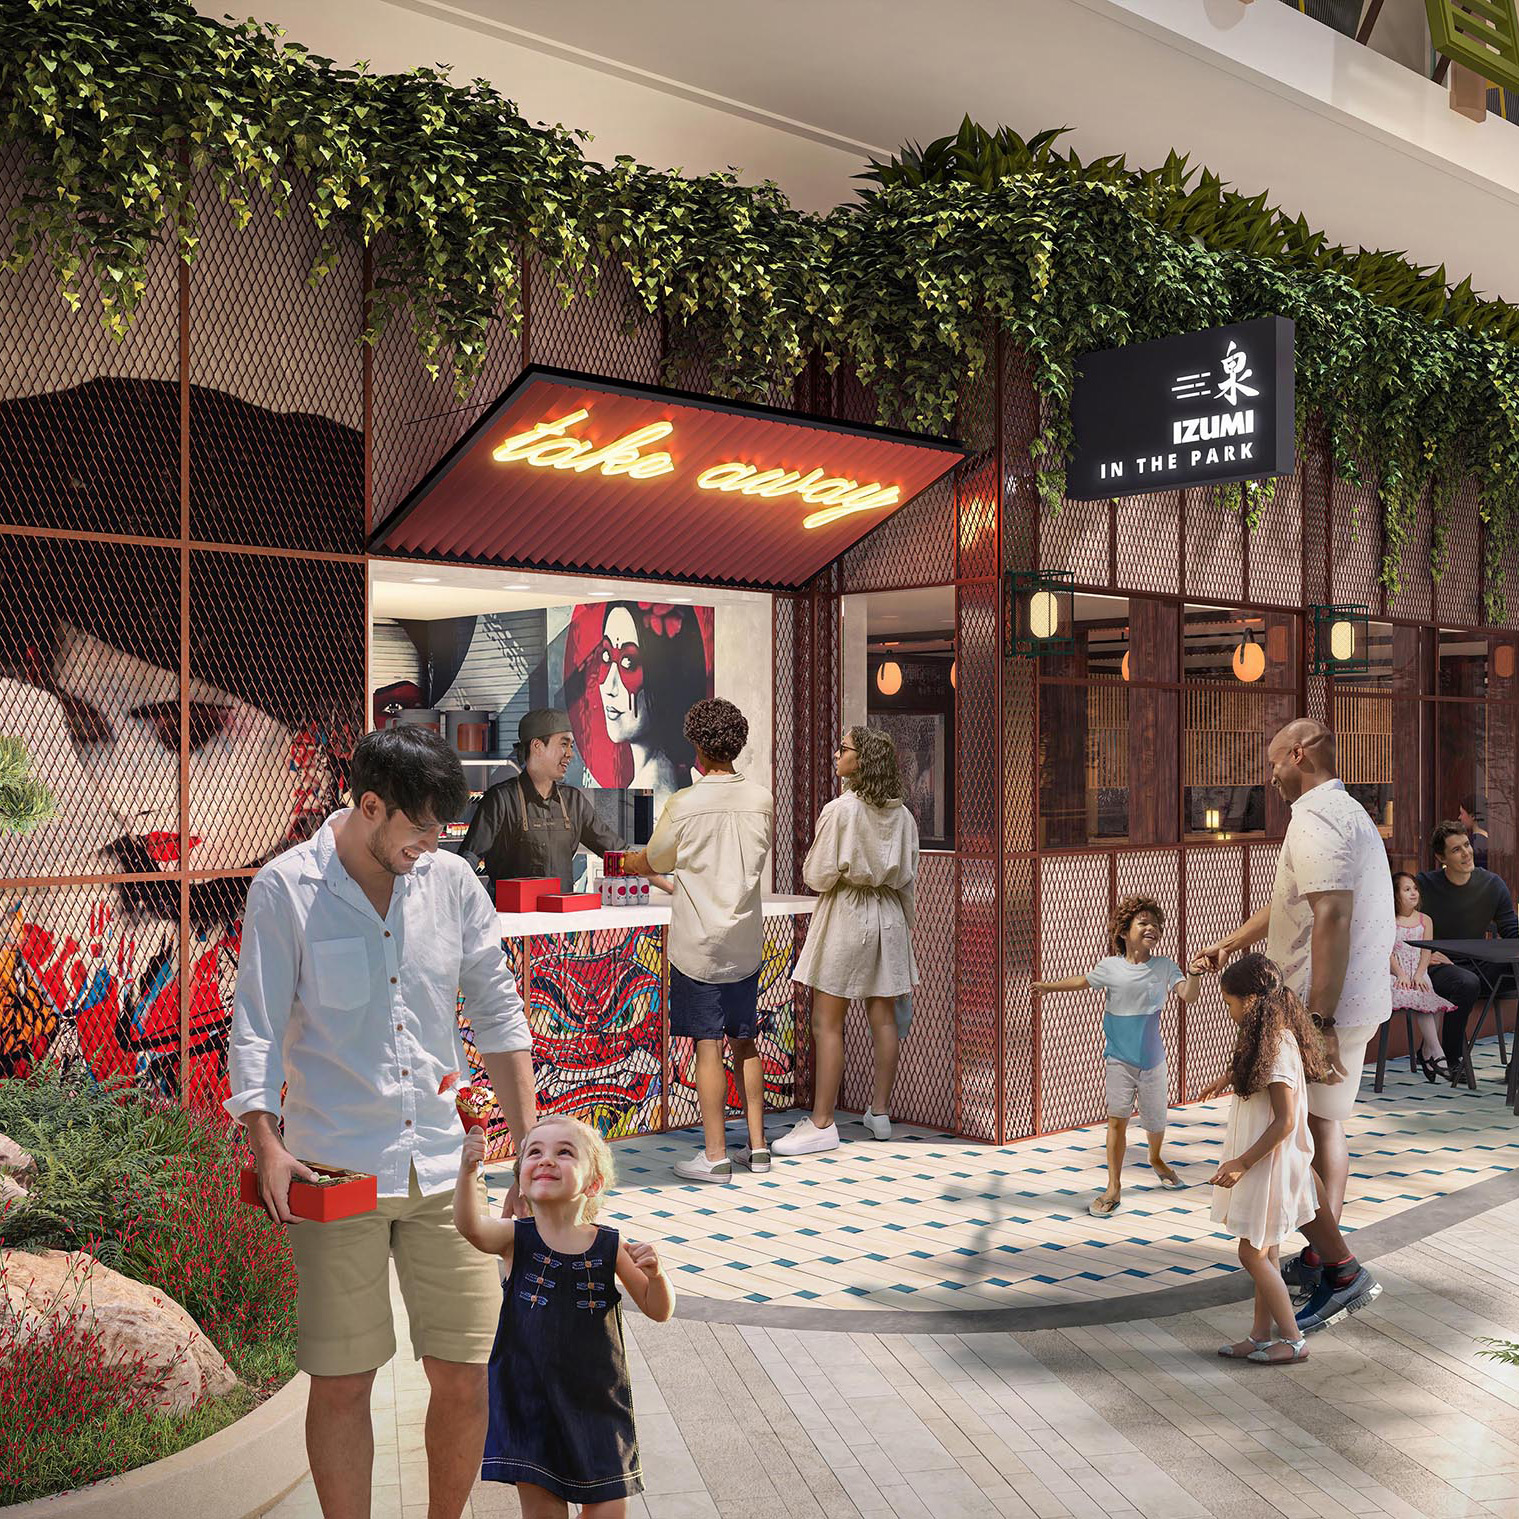 Making its debut is Izumi in the Park, an all-day window in Central Park on Icon of the Seas that offers fresh sushi and Japanese-inspired street food to go, like taiyaki ice cream.